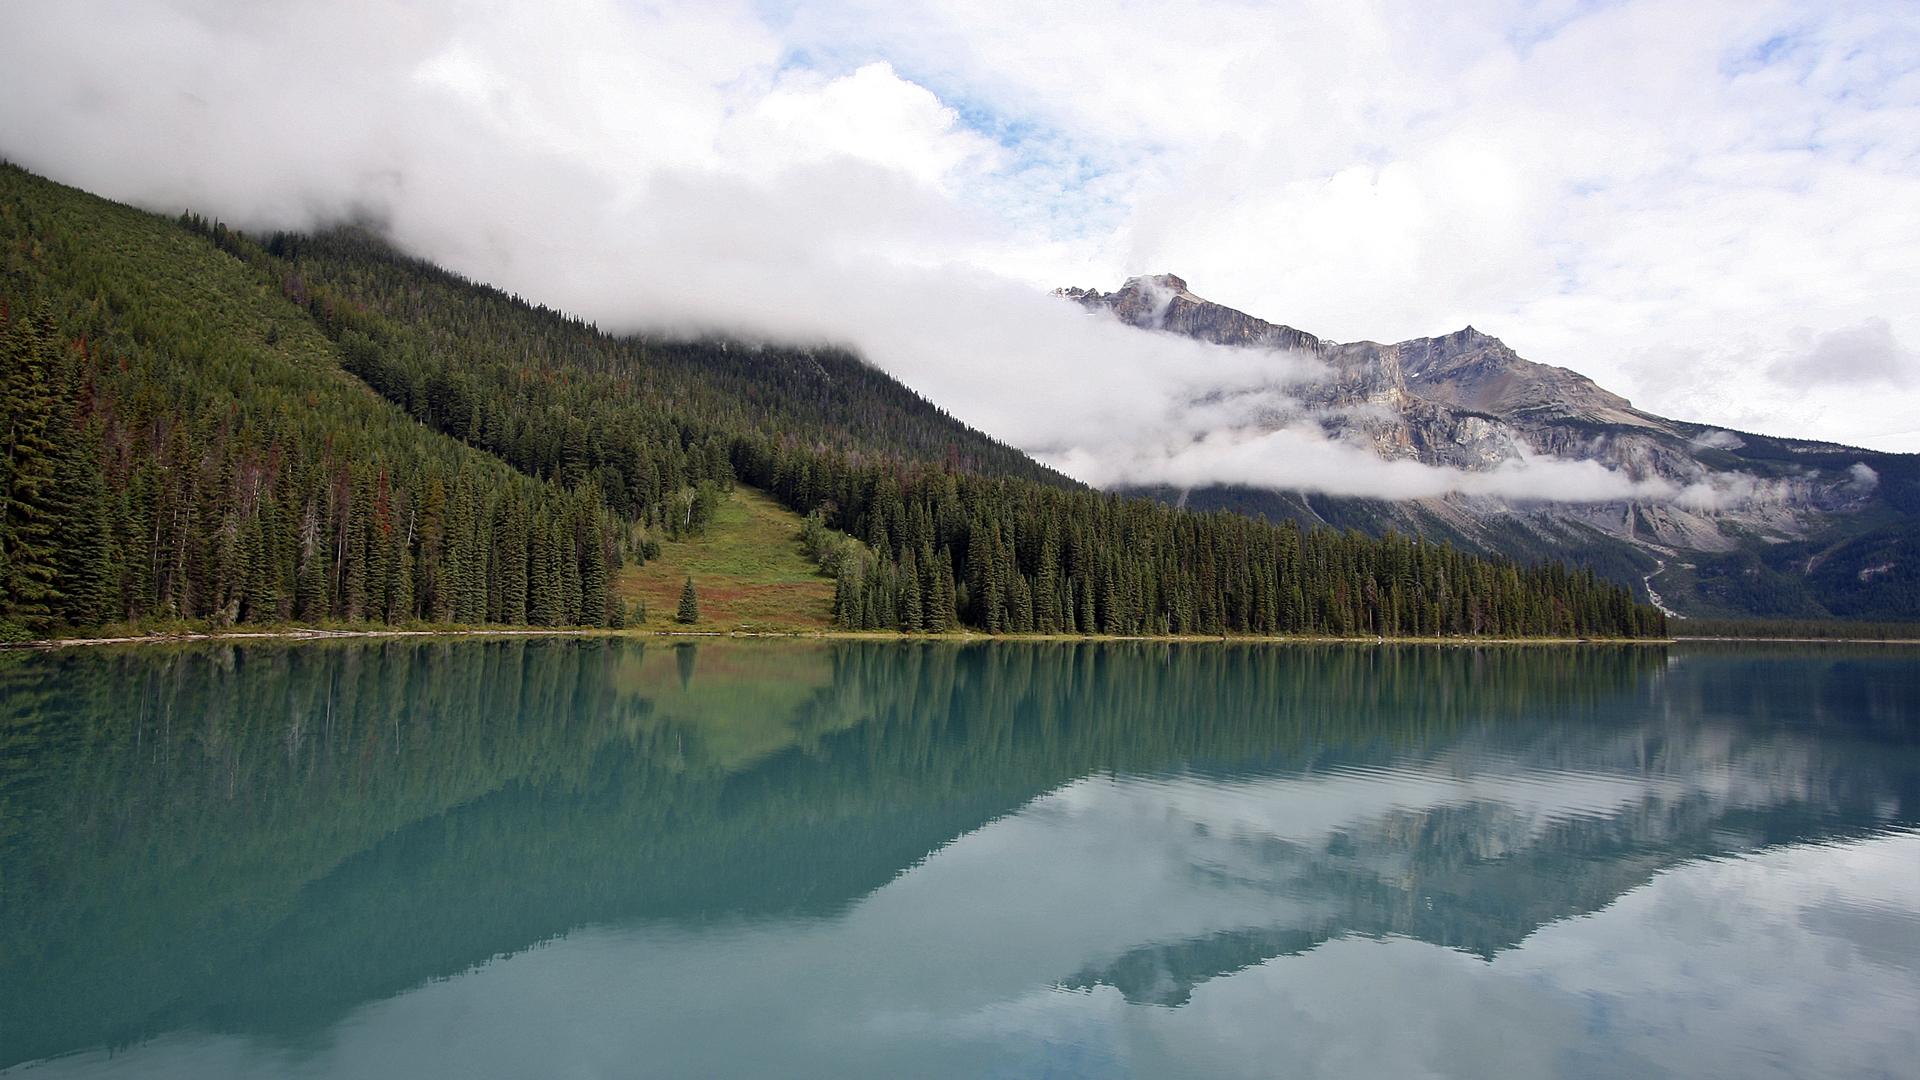 hill, earth, lake, cloud, fog, landscape, mountain, photography, reflection, sky, tree, water, wilderness, wood, lakes